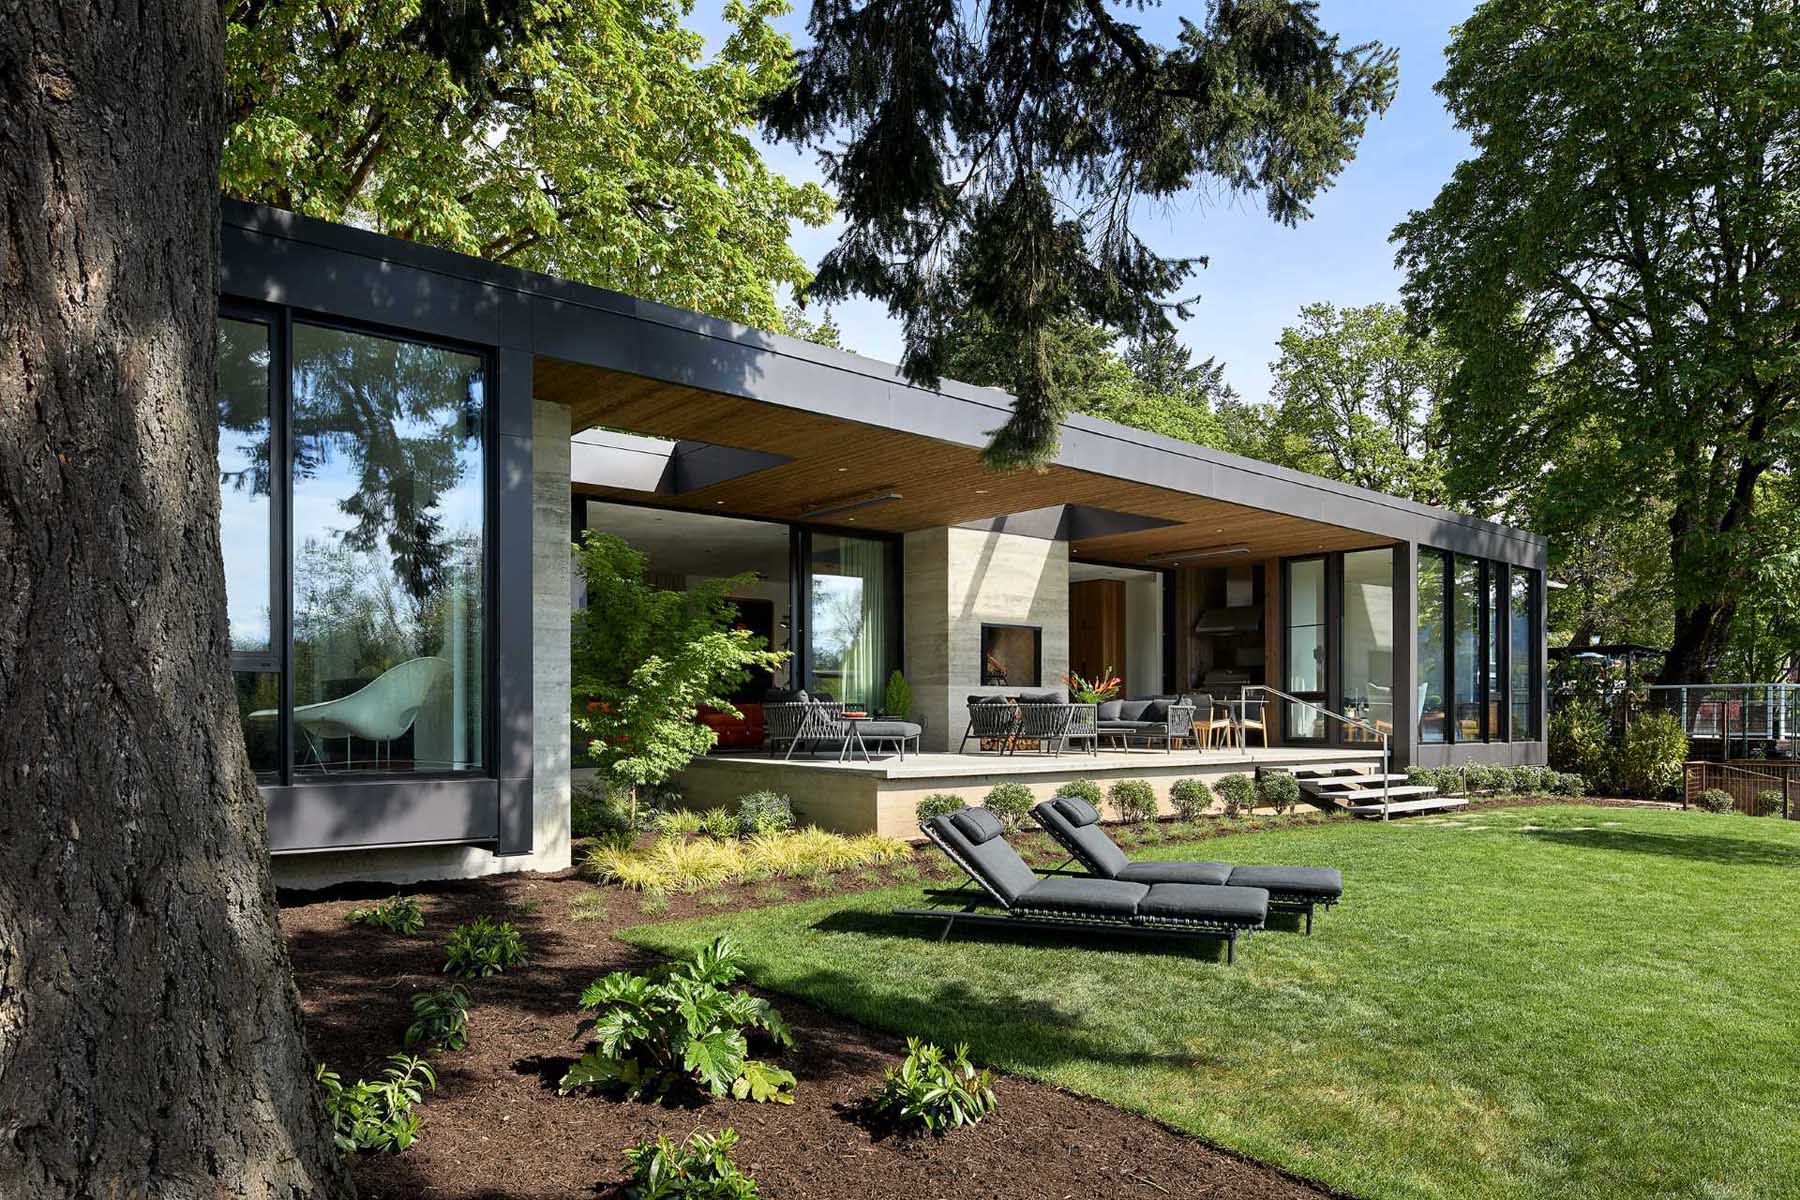 A modern house with a partially covered patio with a wood burning fireplace.